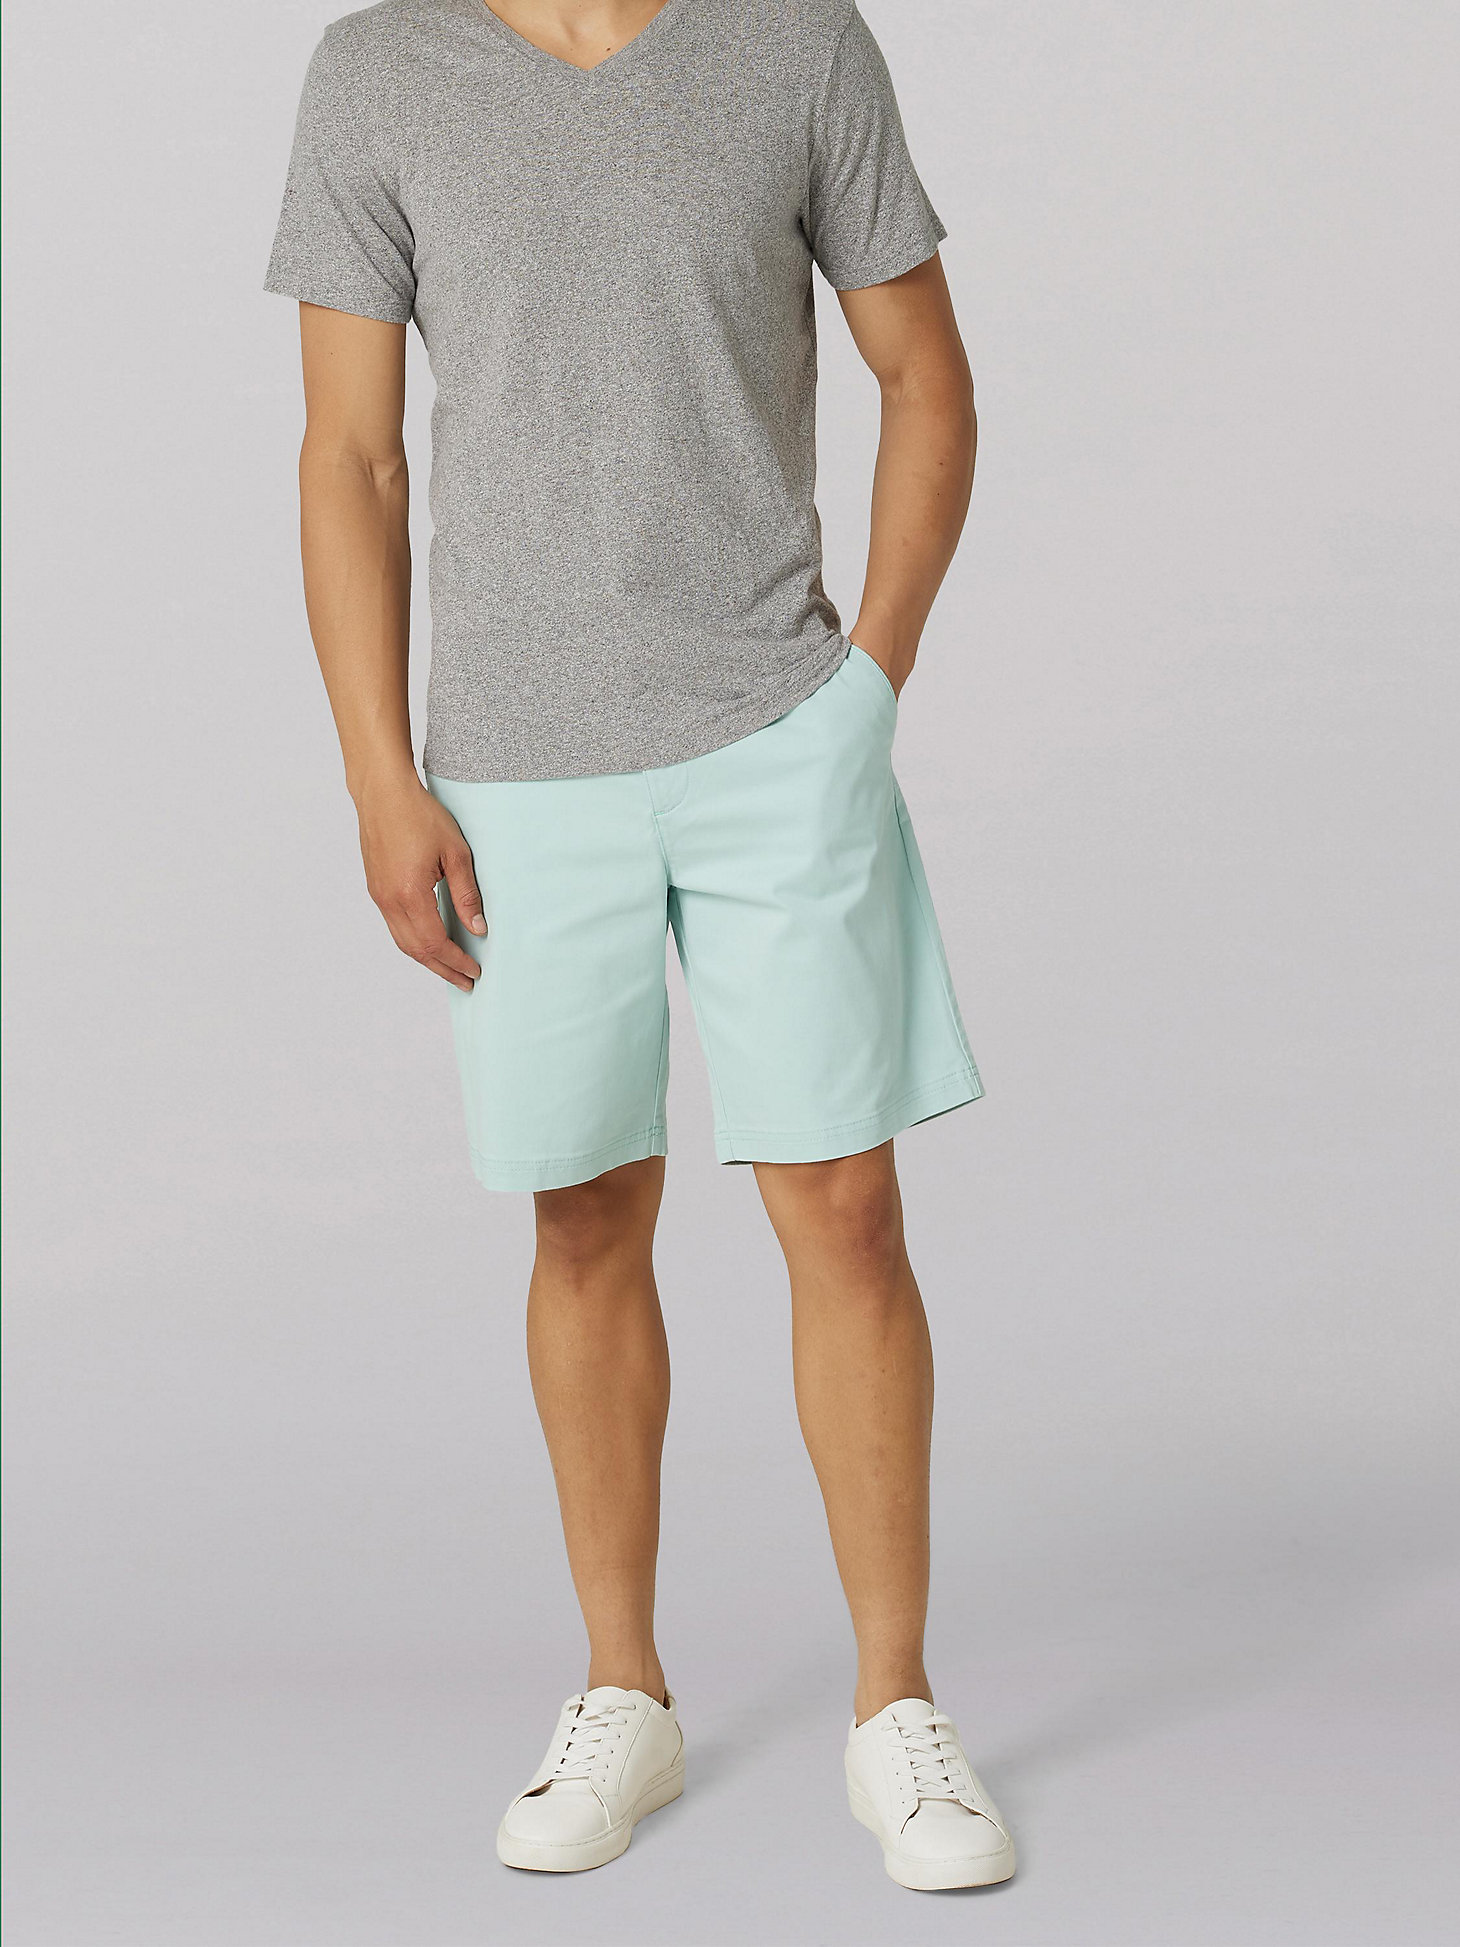 Men's Extreme Comfort Flat Front Short in Sea Green main view